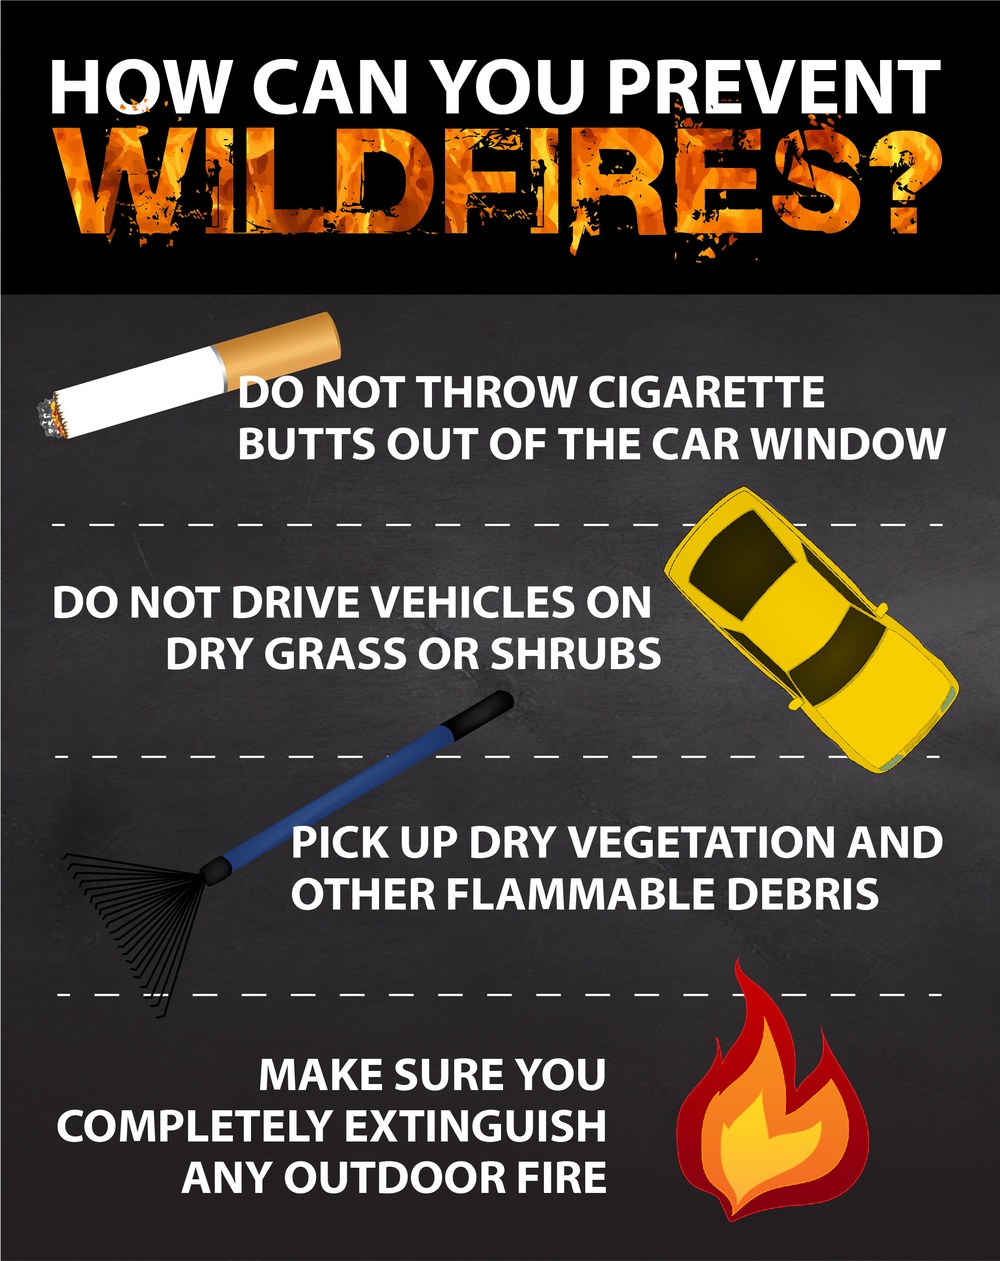 How Can You Prevent Wildfires?